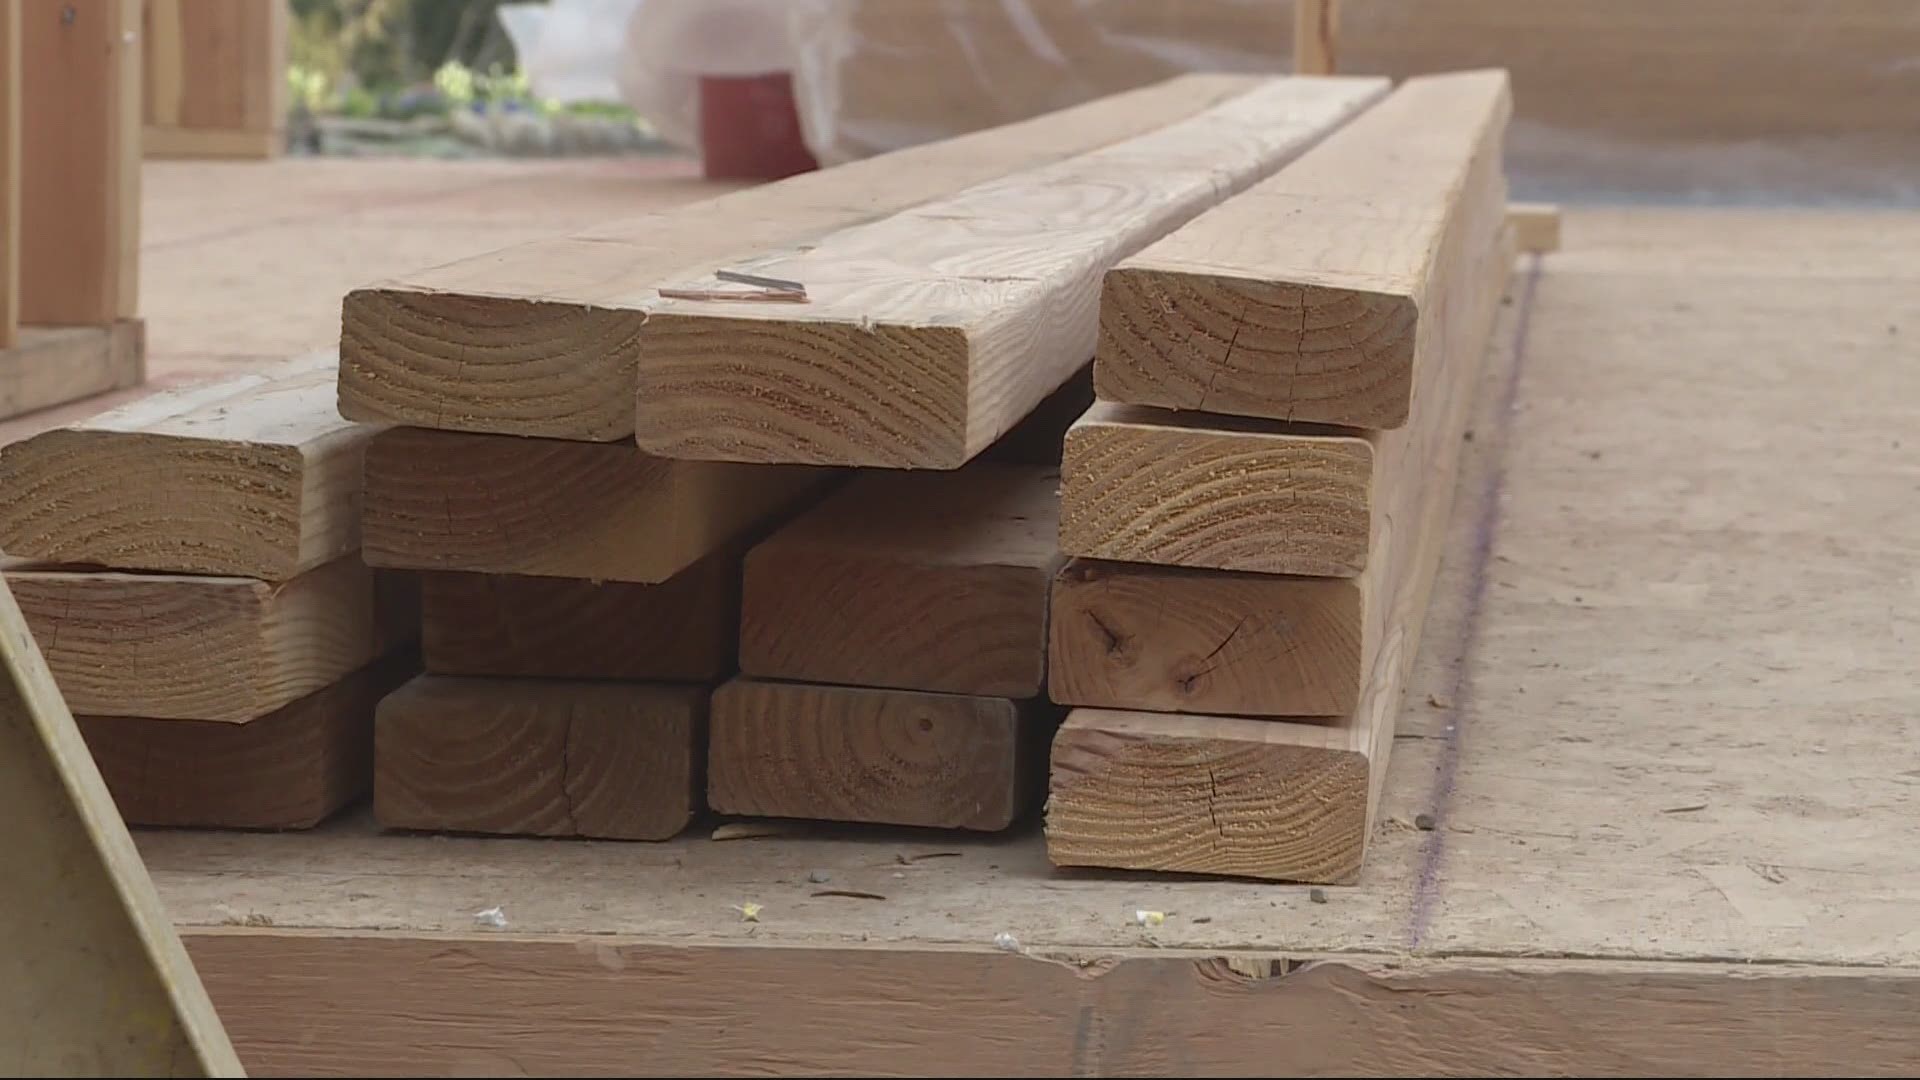 There are still a lot of people struggling after losing their home in last year’s wildfires. But some have started to rebuild. Christine Pitawanich reports.